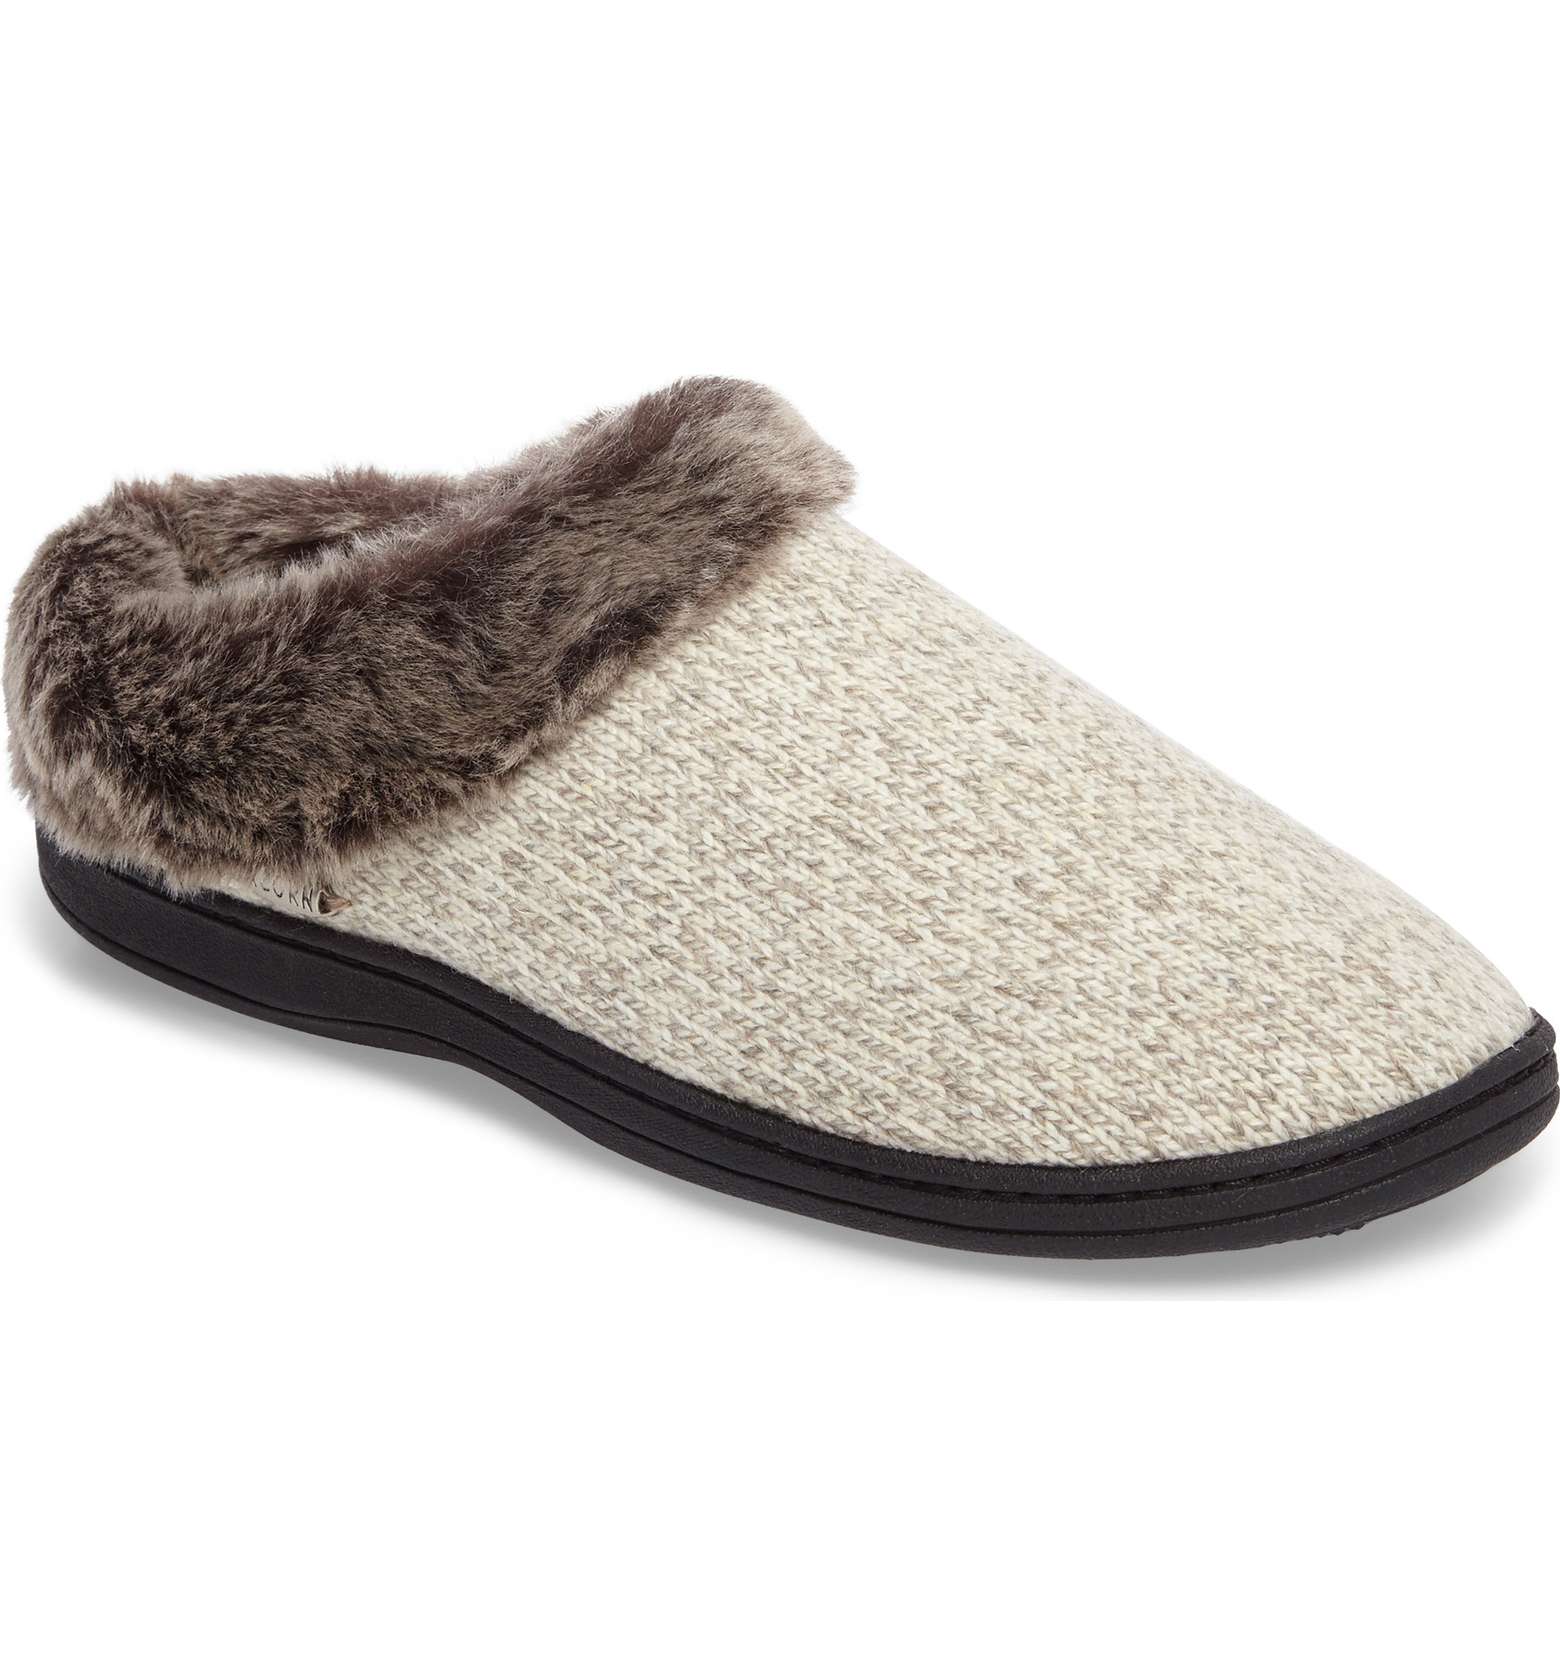 4. Slippers